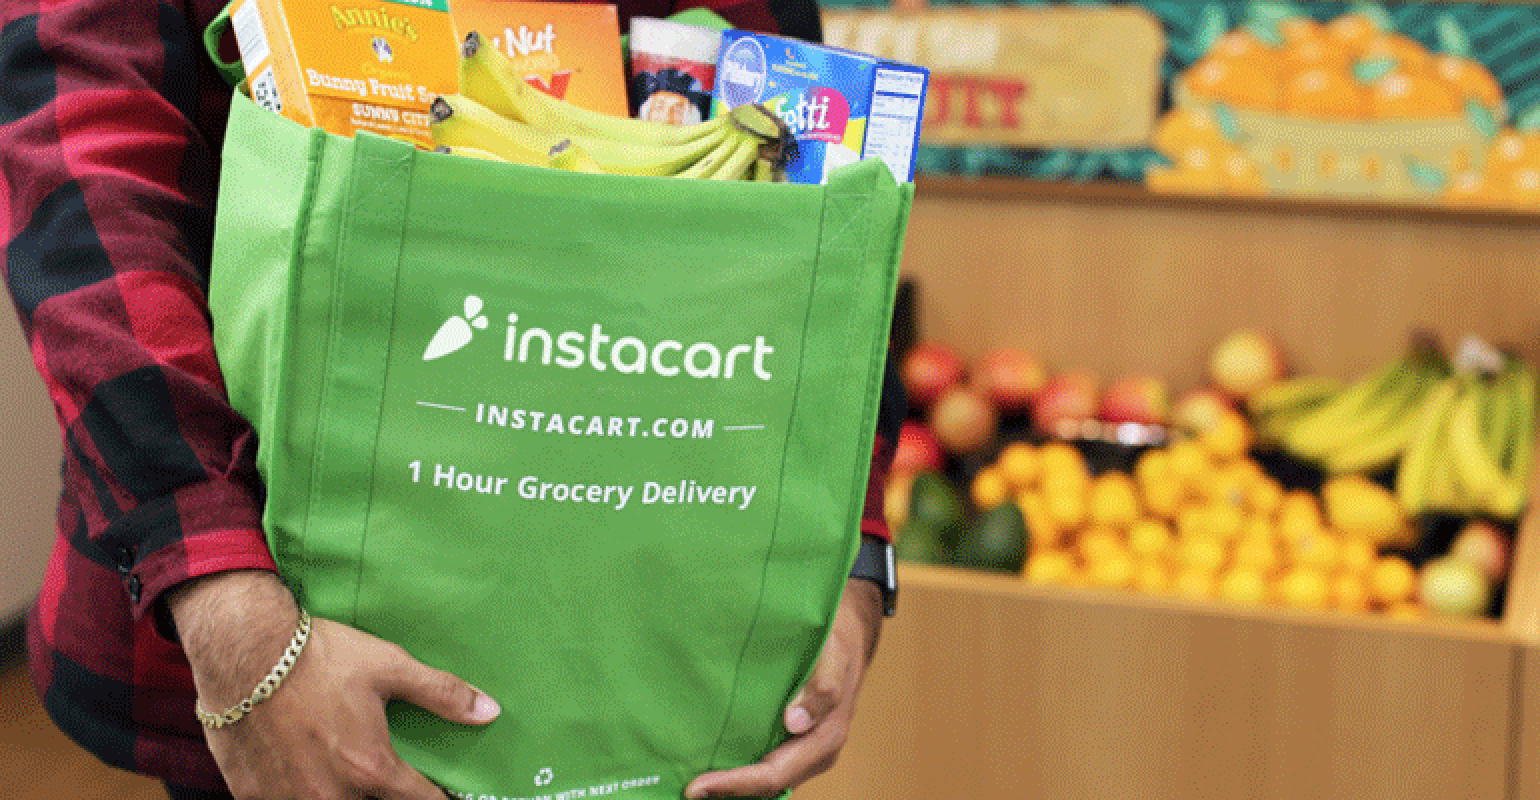 Is Instacart safe to use for grocery delivery right now